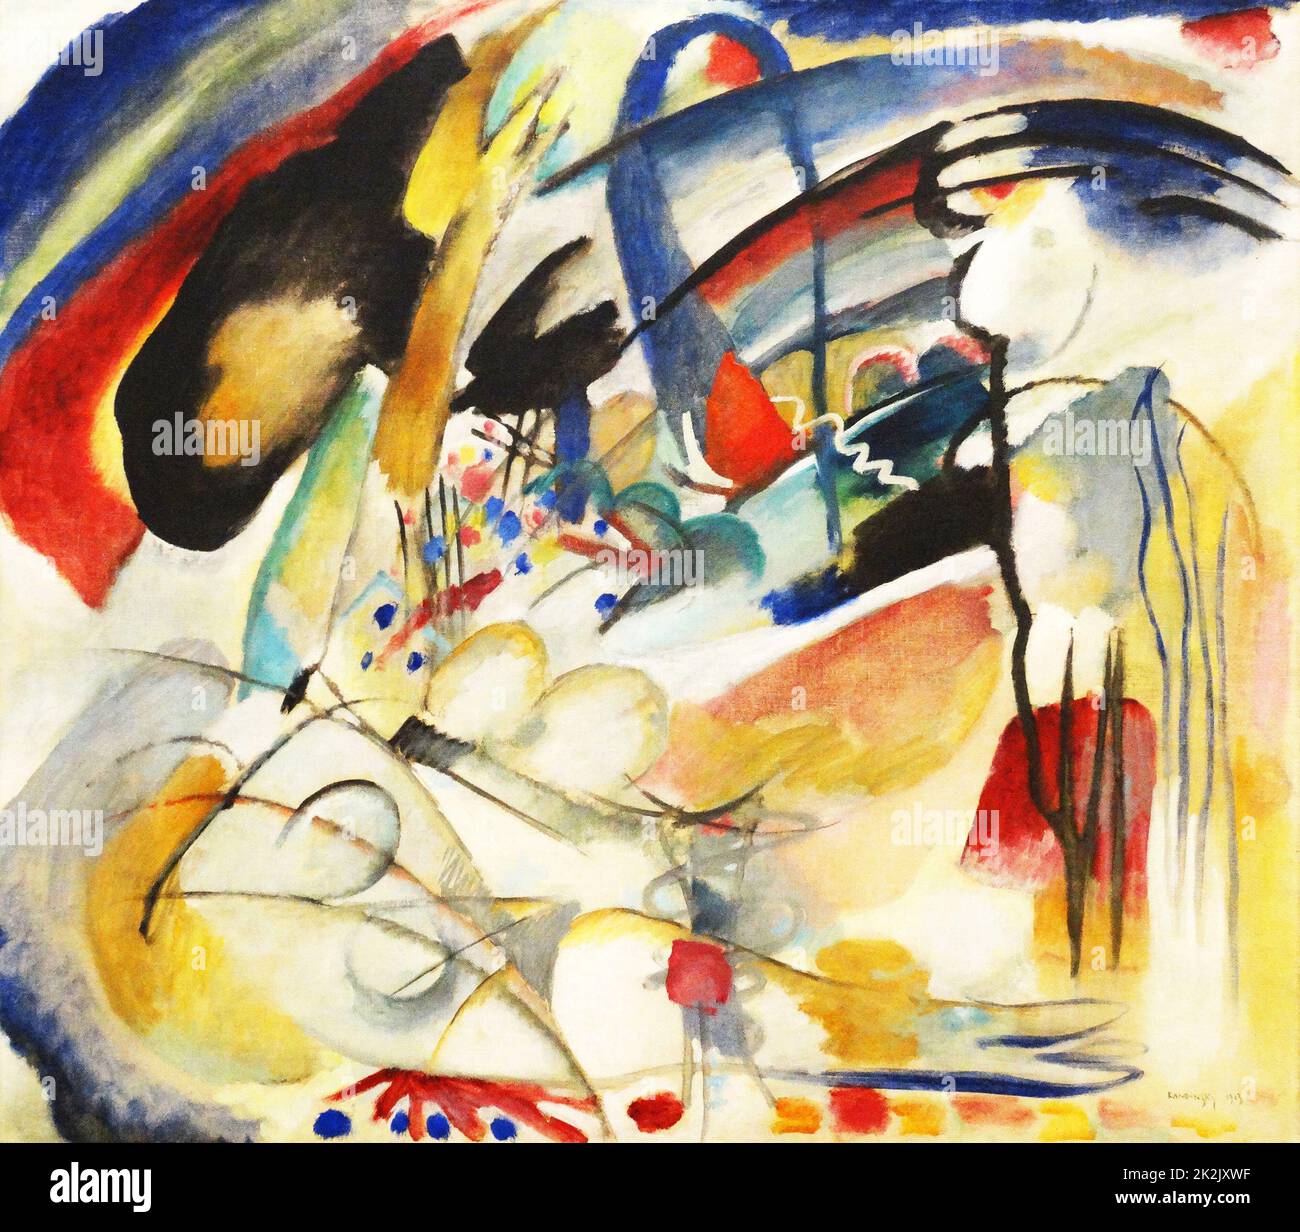 Improvisation 33 (Orient 1) (oil on canvas, 88 x 100 cm) by Wassily Kandinsky (1866-1944) an influential Russian painter and art theorist. He is credited with painting the first purely abstract works. Stock Photo